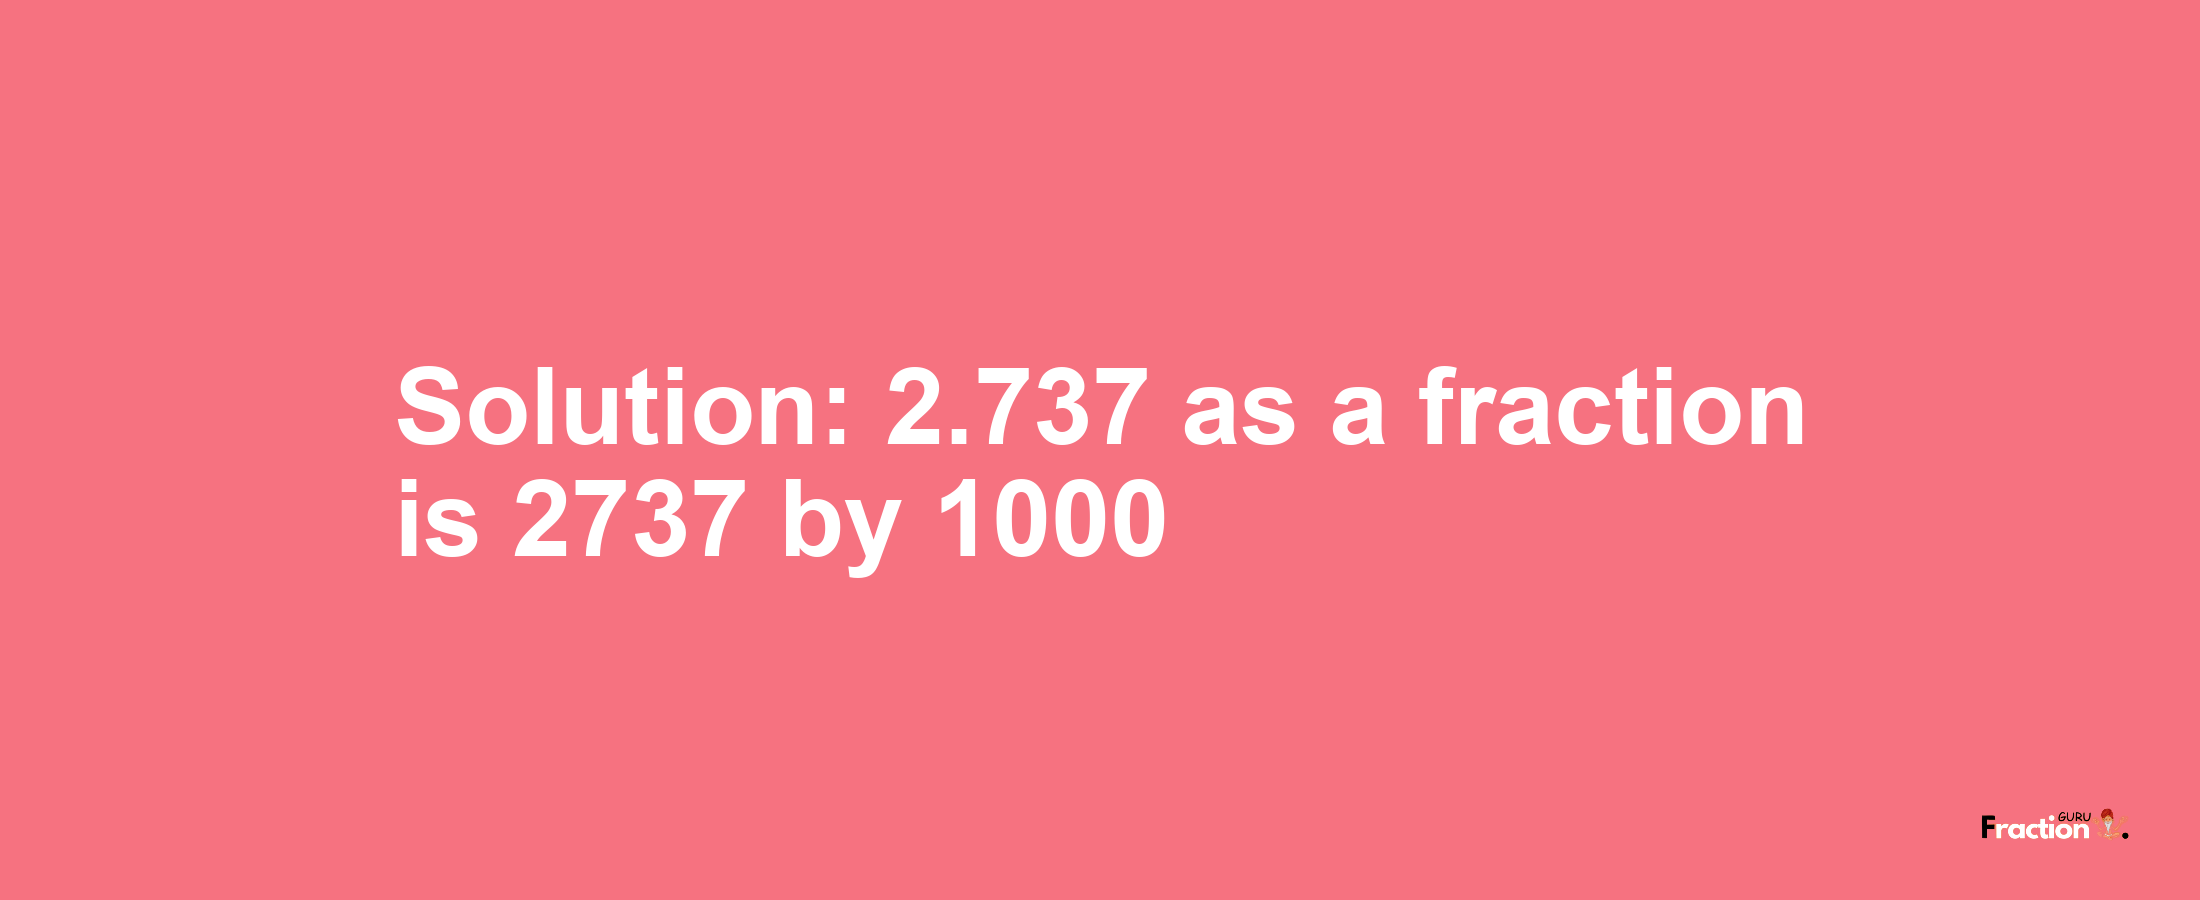 Solution:2.737 as a fraction is 2737/1000